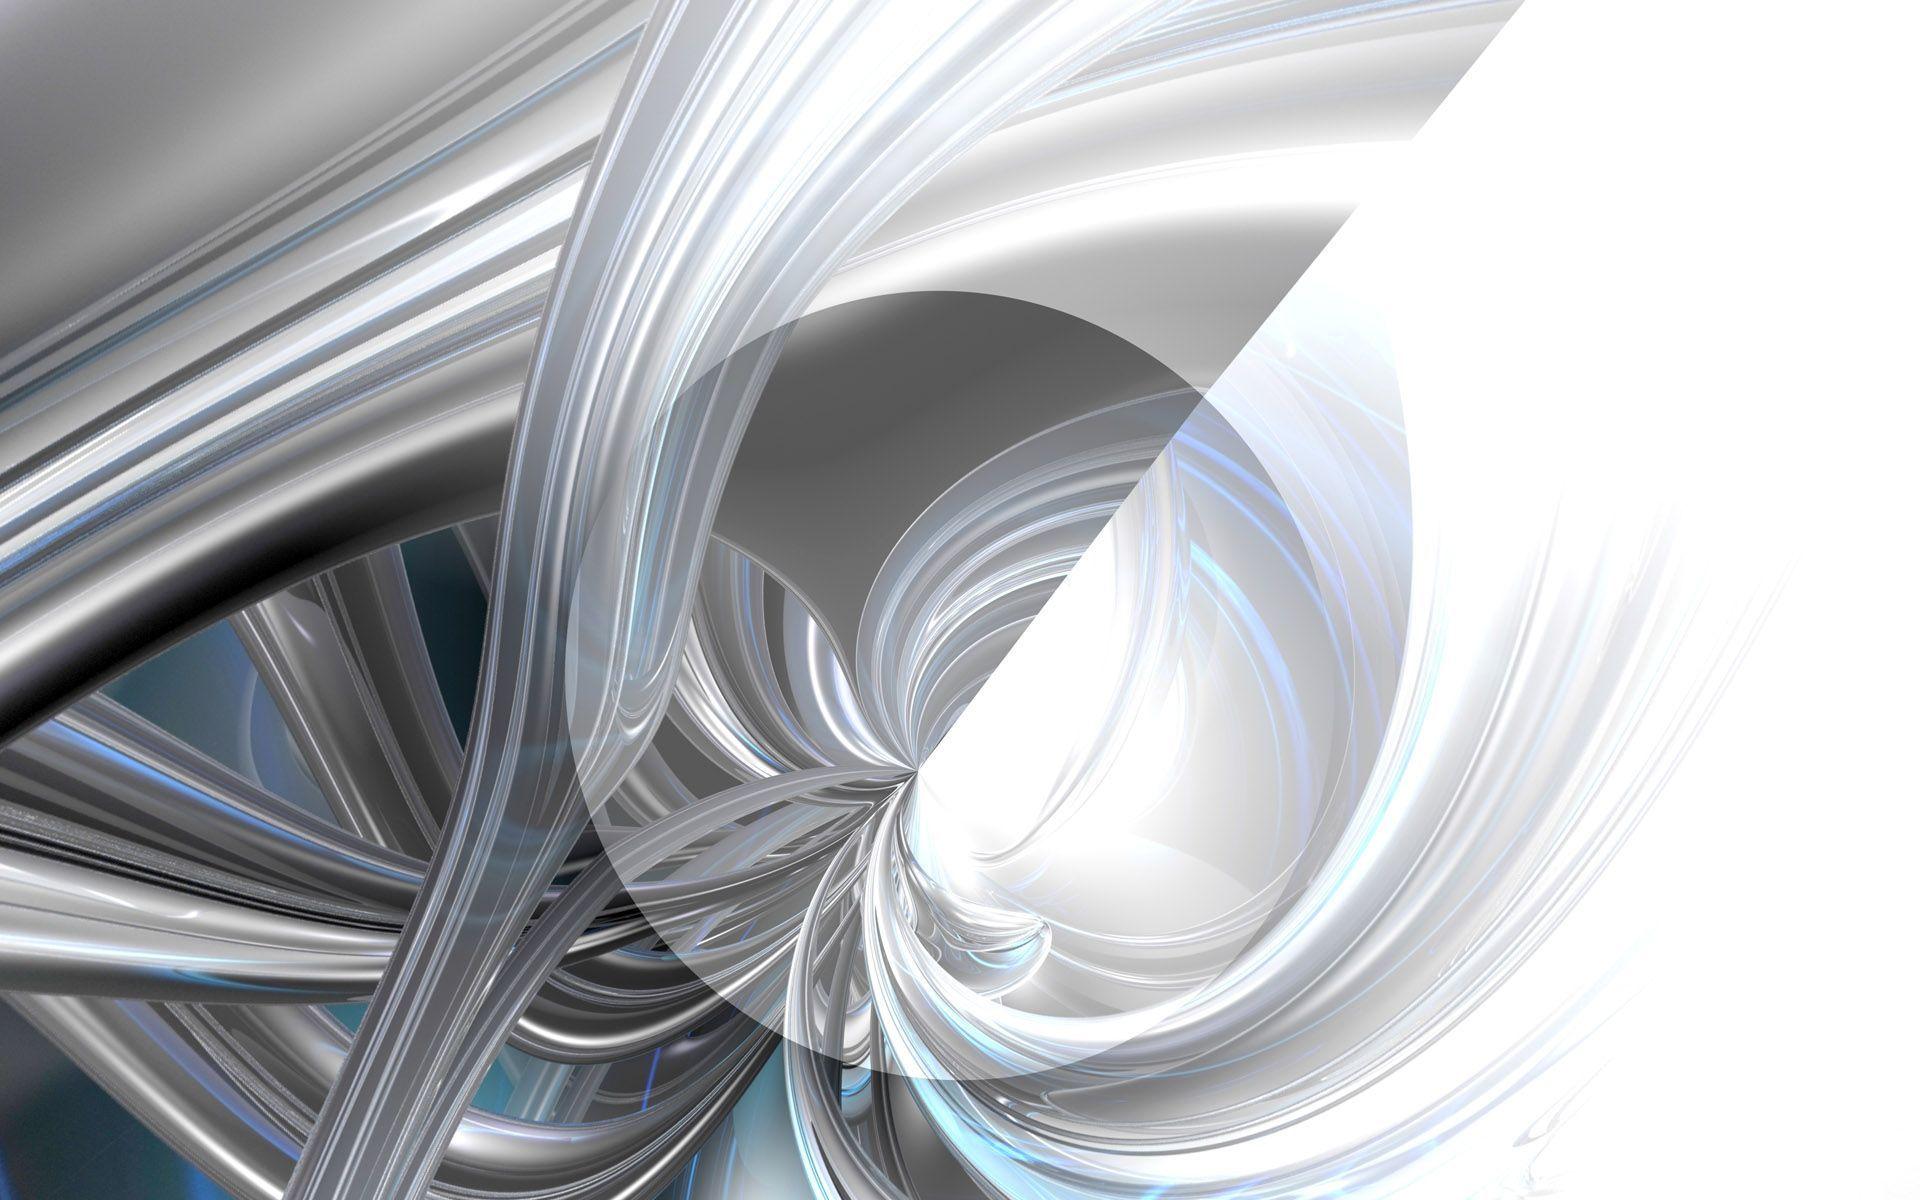 Abstract silver liquid wave free desktop background